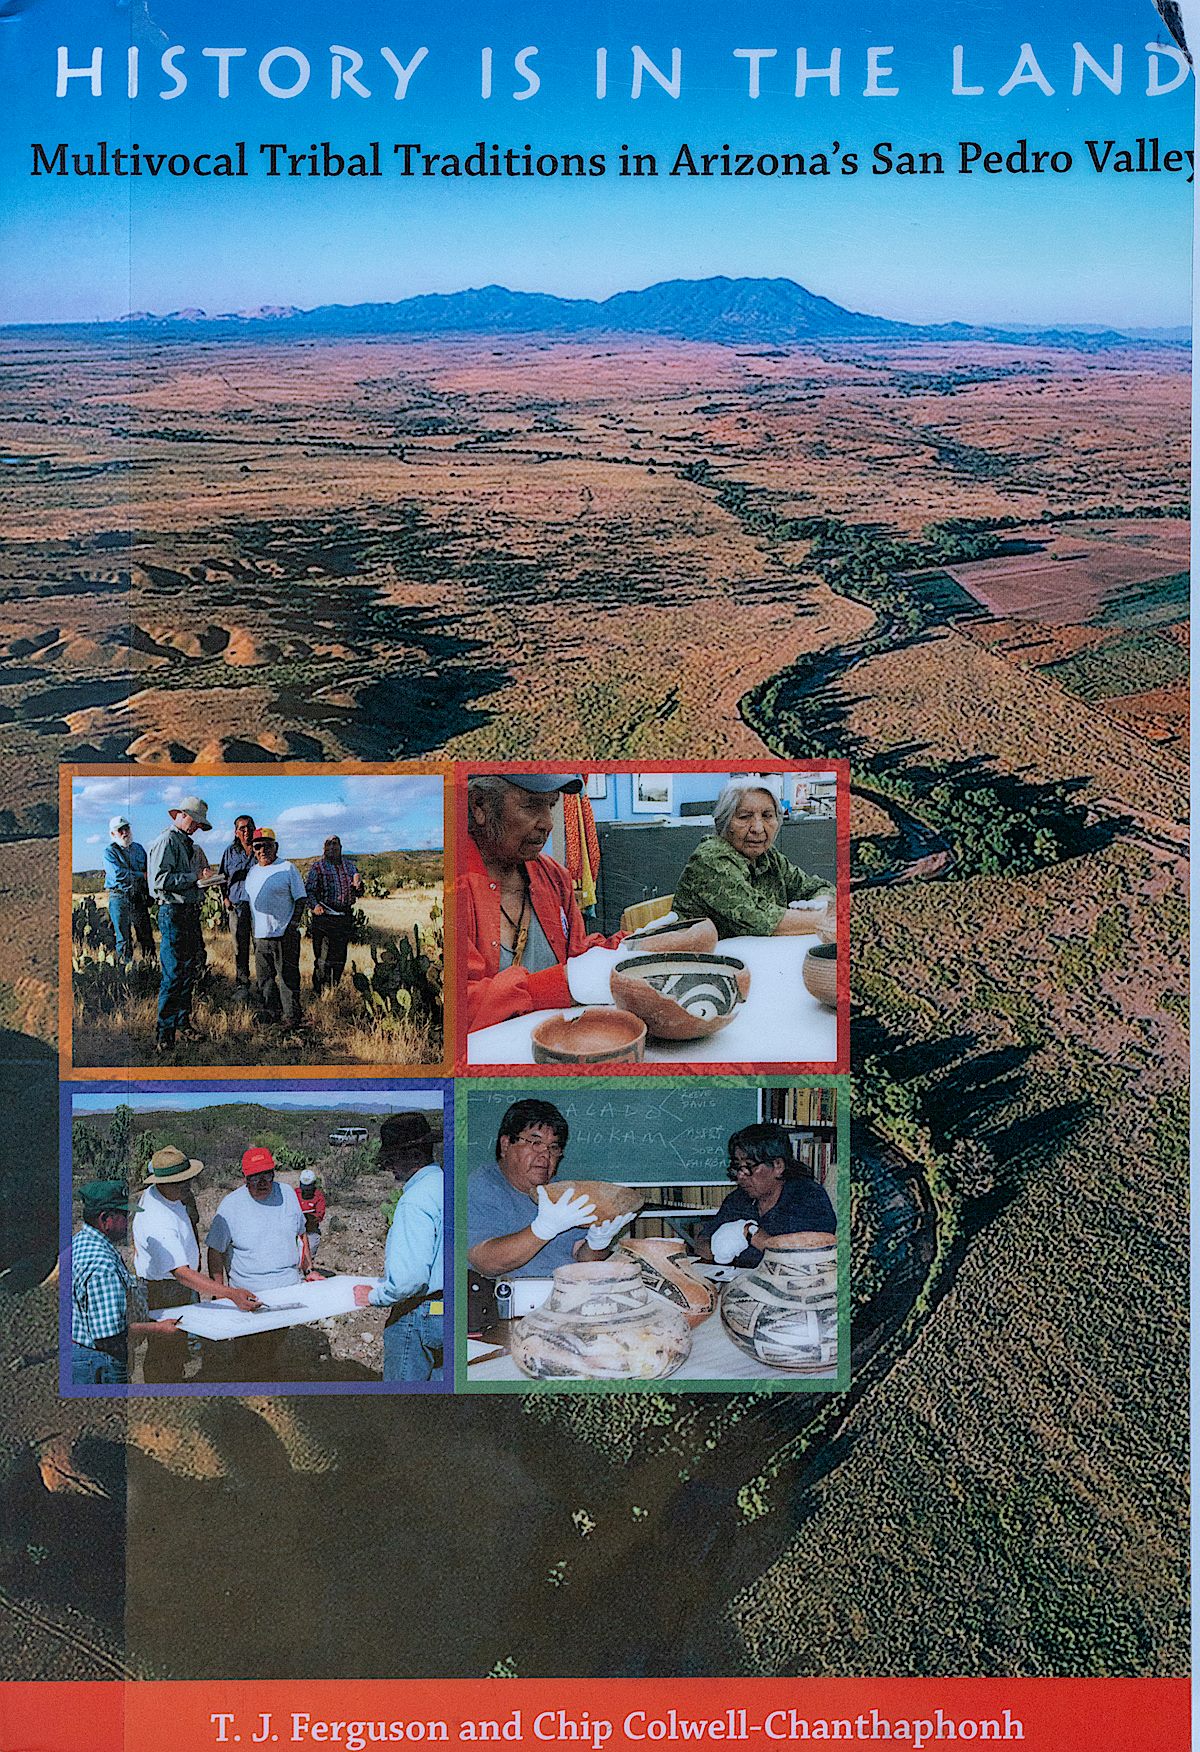 History is in the Land: Multivocal Tribal Traditions in Arizona's San Pedro Valley - T. J. Ferguson and Chip Colwell-Chanthaphonh. June 2018.